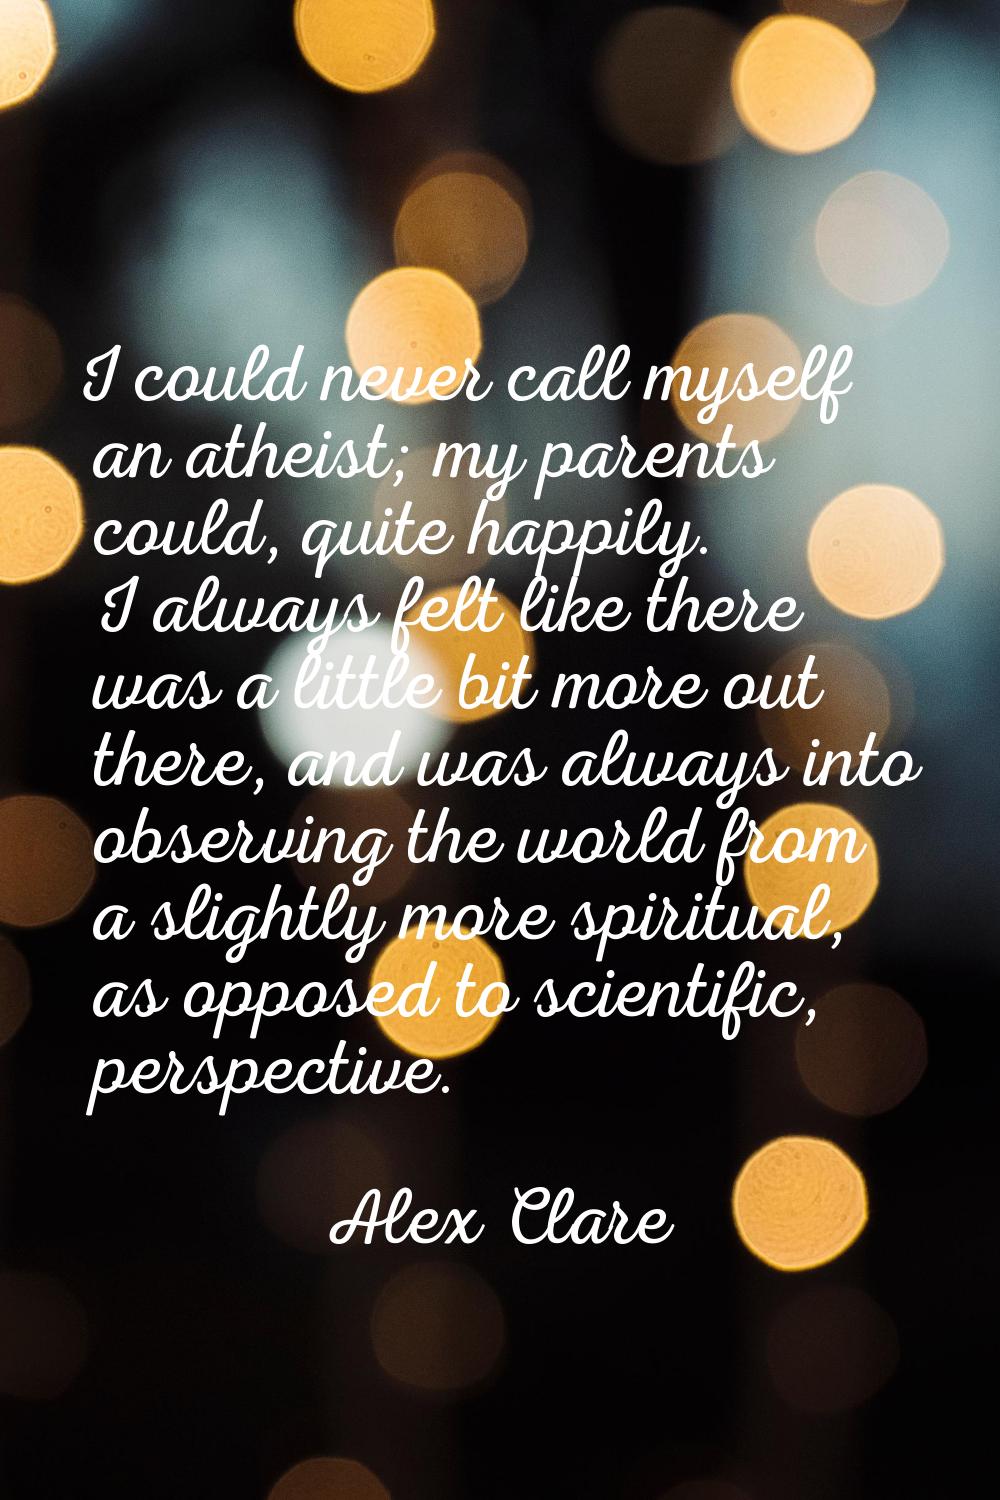 I could never call myself an atheist; my parents could, quite happily. I always felt like there was